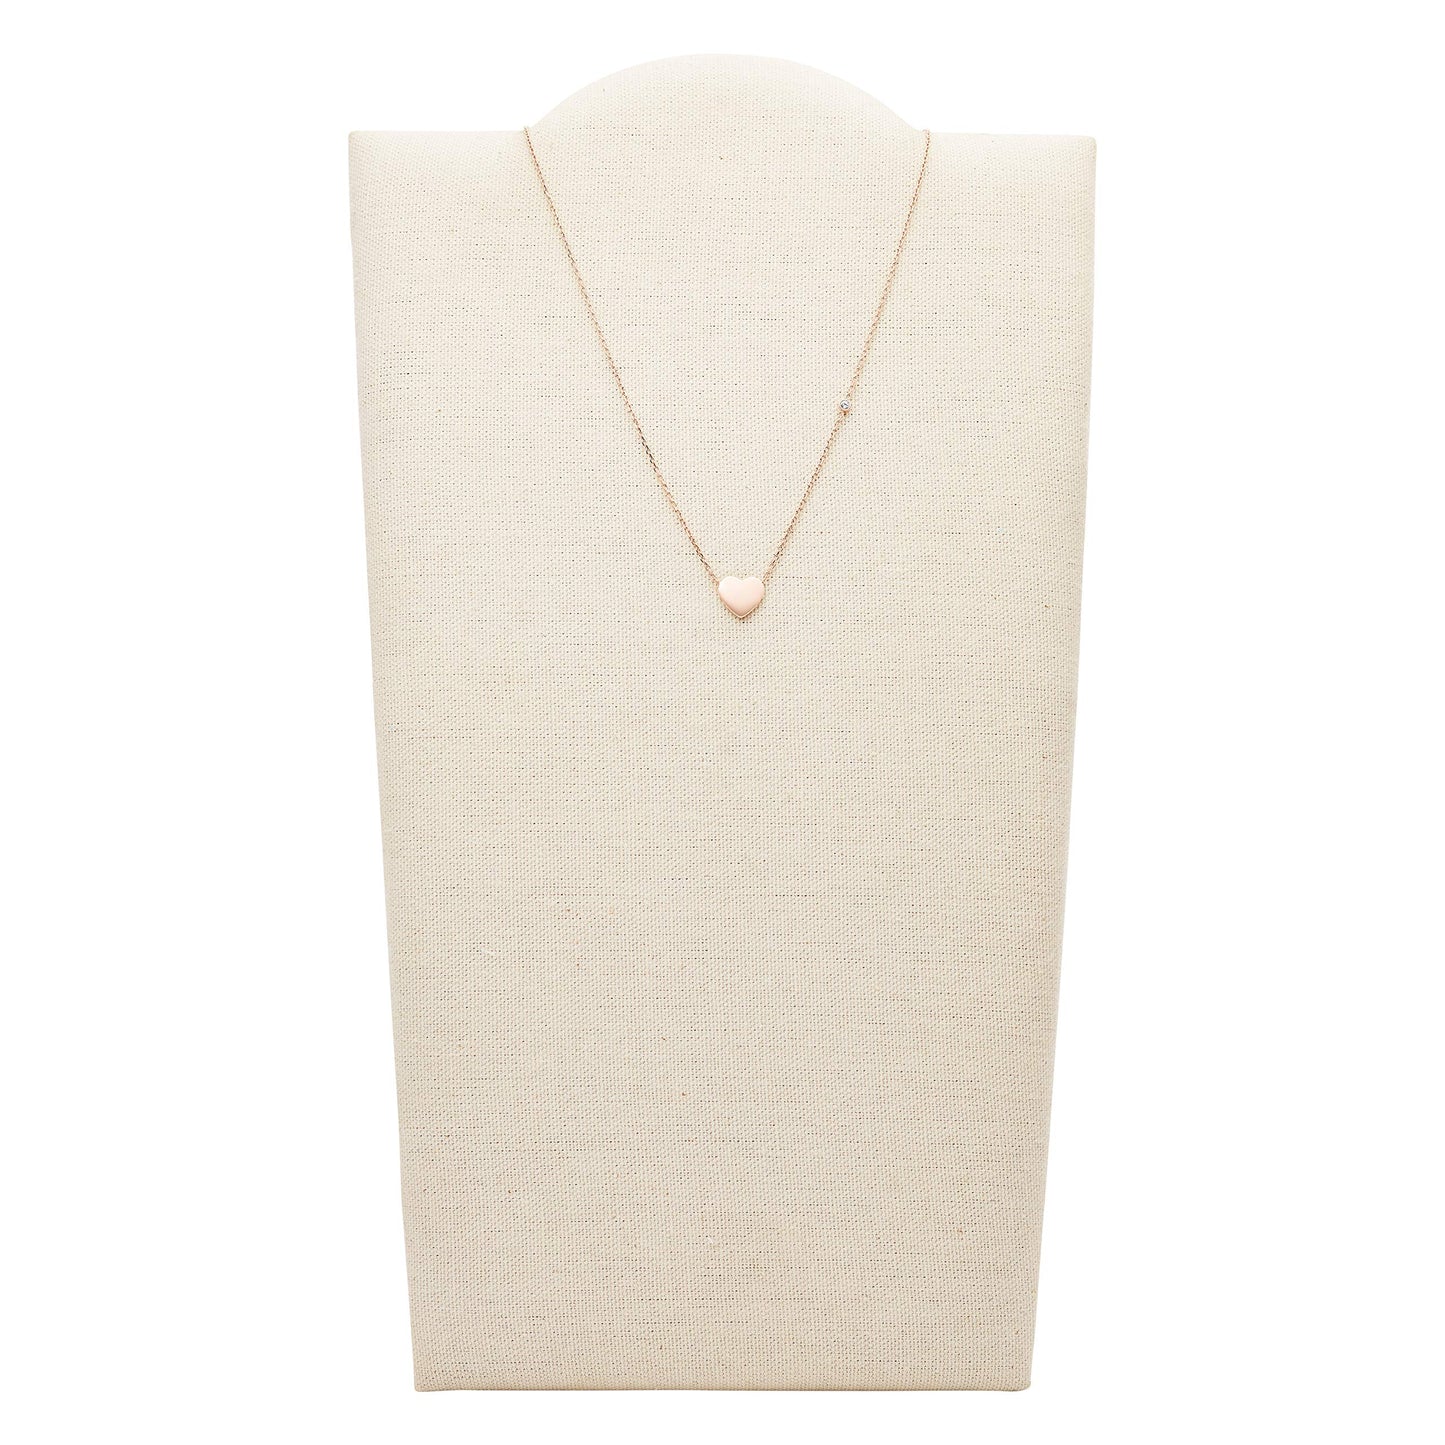 Fossil Women's Rose Gold Necklace, JF03081791